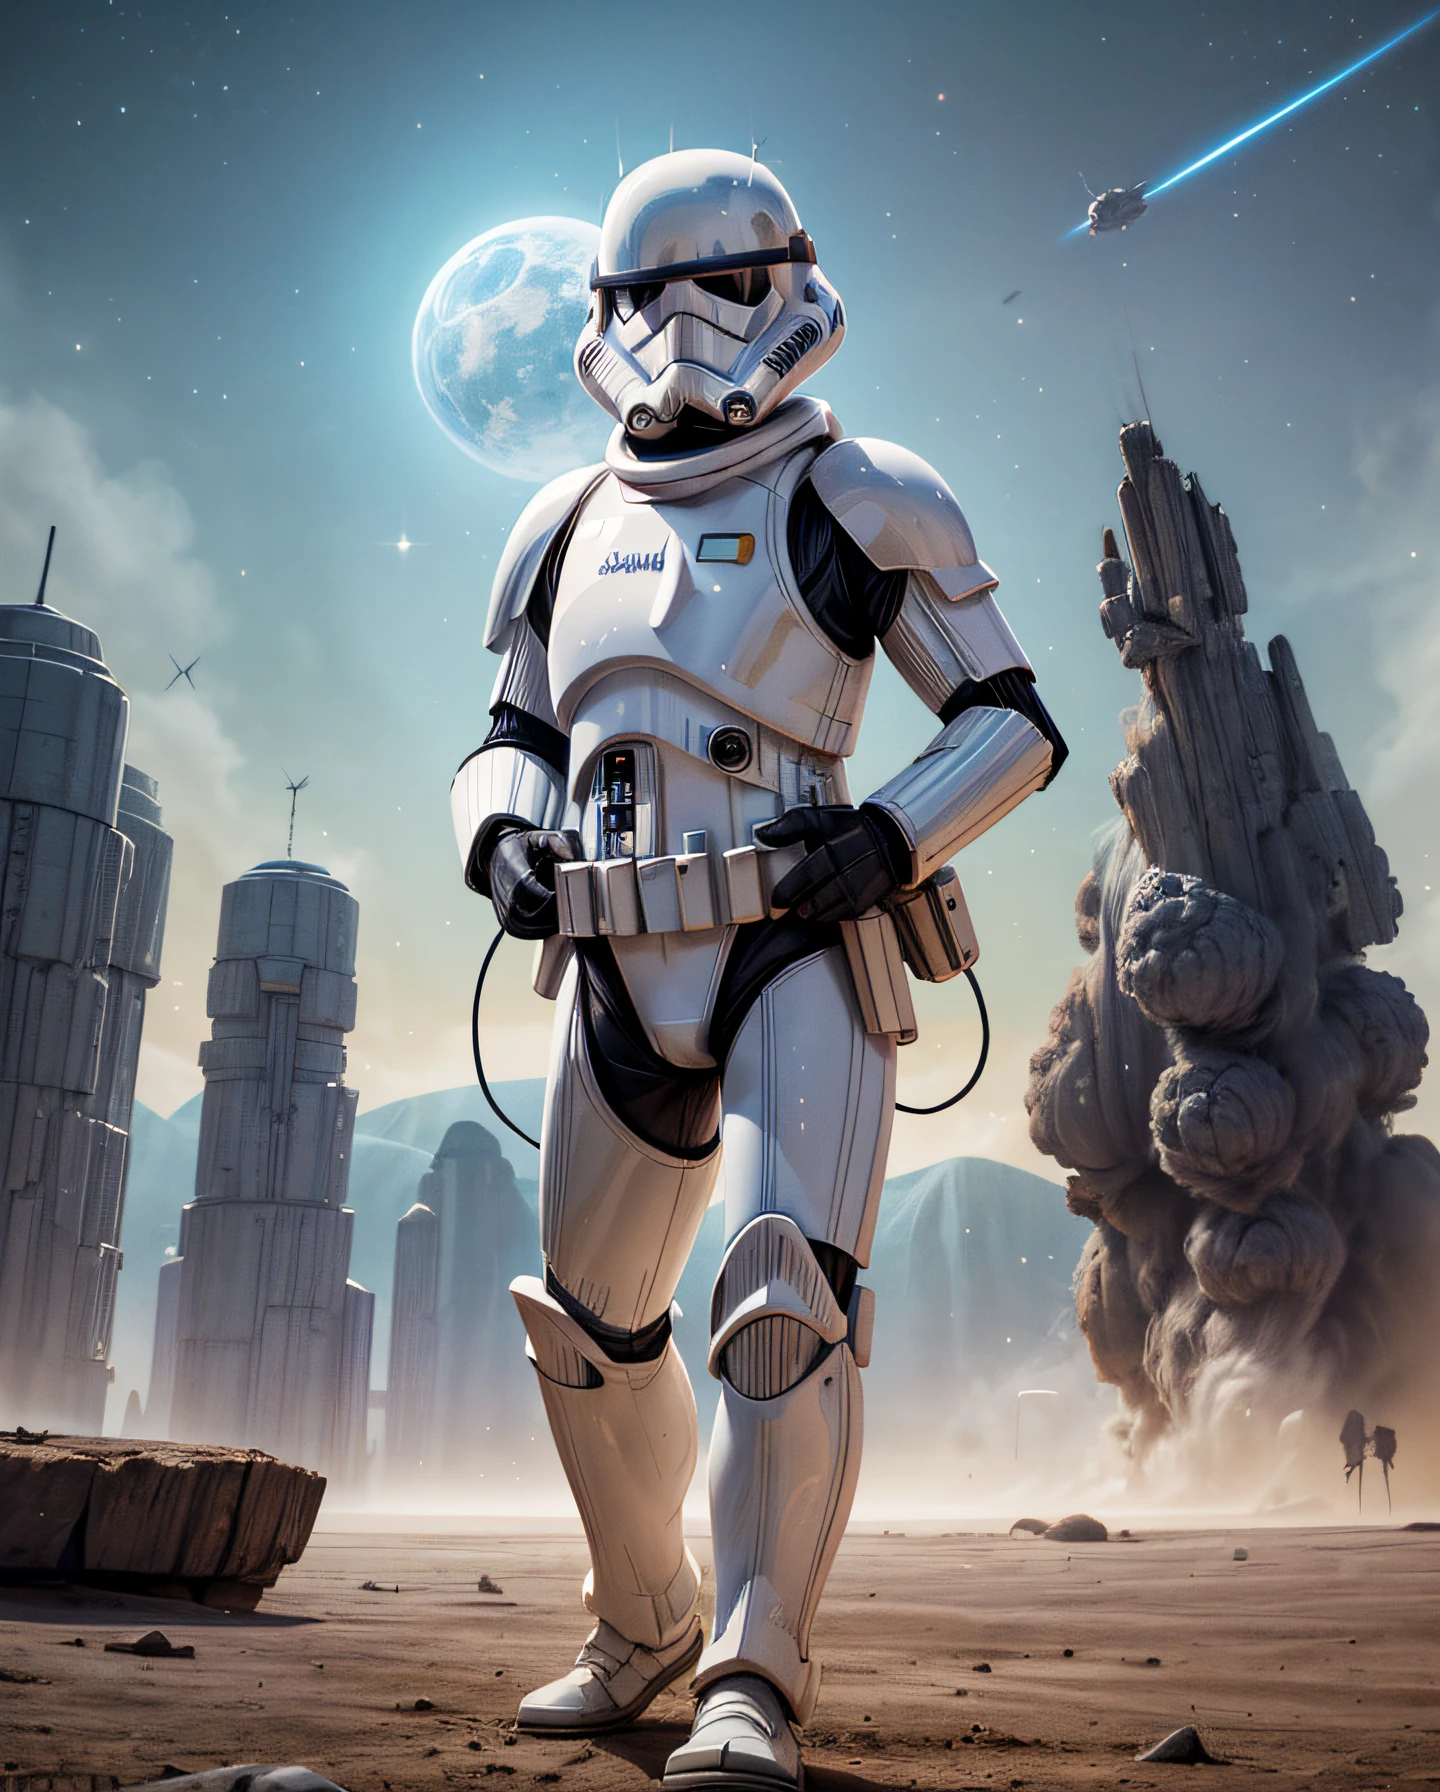 (best quality,highres:1.2),ultra-detailed,(realistic:1.37),portrait:1.1,Star Wars Stormtrooper,white armor,sharp focus,glistening helmet,precise details,menacing visage,battle-worn,heavy blaster rifle,imposing stature,eerie presence,galactic battle,ominous backdrop,dystopian ambiance,dramatic lighting,dark shadows,intense contrast,vivid colors,sci-fi genre-icon,set in the vastness of space,empire,imperial symbol,interstellar war,alien planets,deep space exploration,starships,otherworldly technology,intergalactic adventure,courageous rebels,determined heroes,epic battle scenes,hidden hope amidst chaos,iconic franchise,legendary saga,mythical realm,pop culture phenomenon, galaxy background,